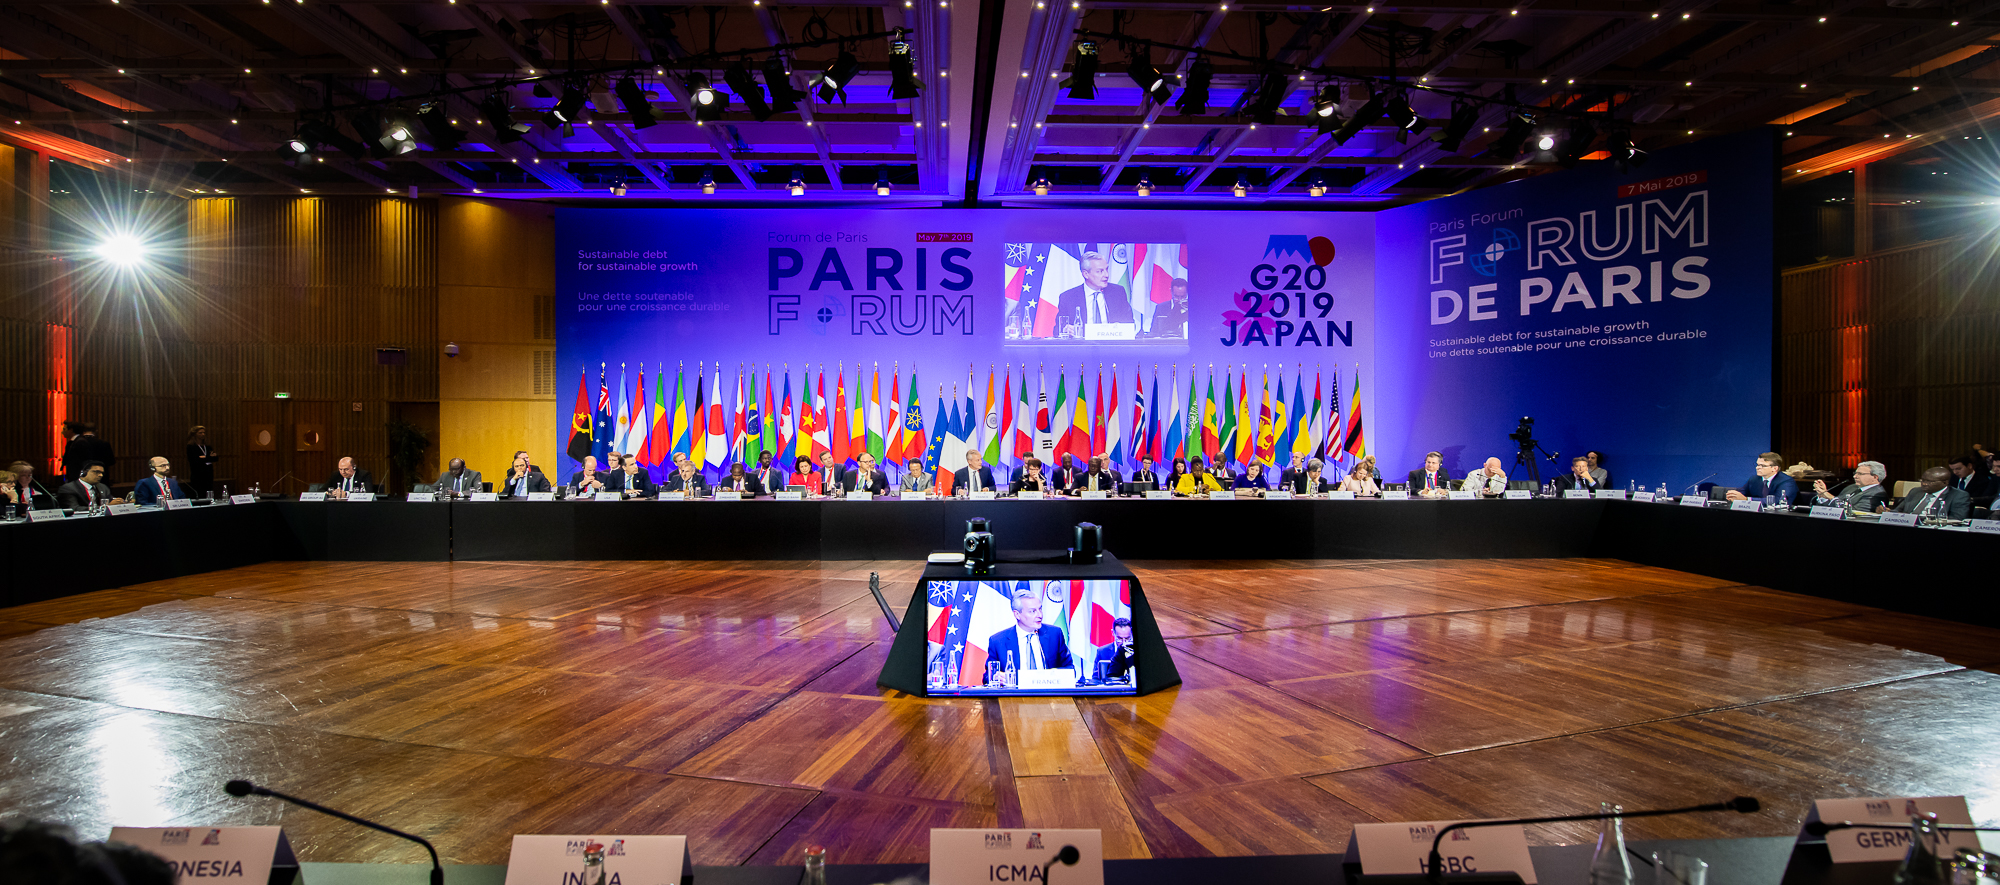 High level conference of the Paris Forum